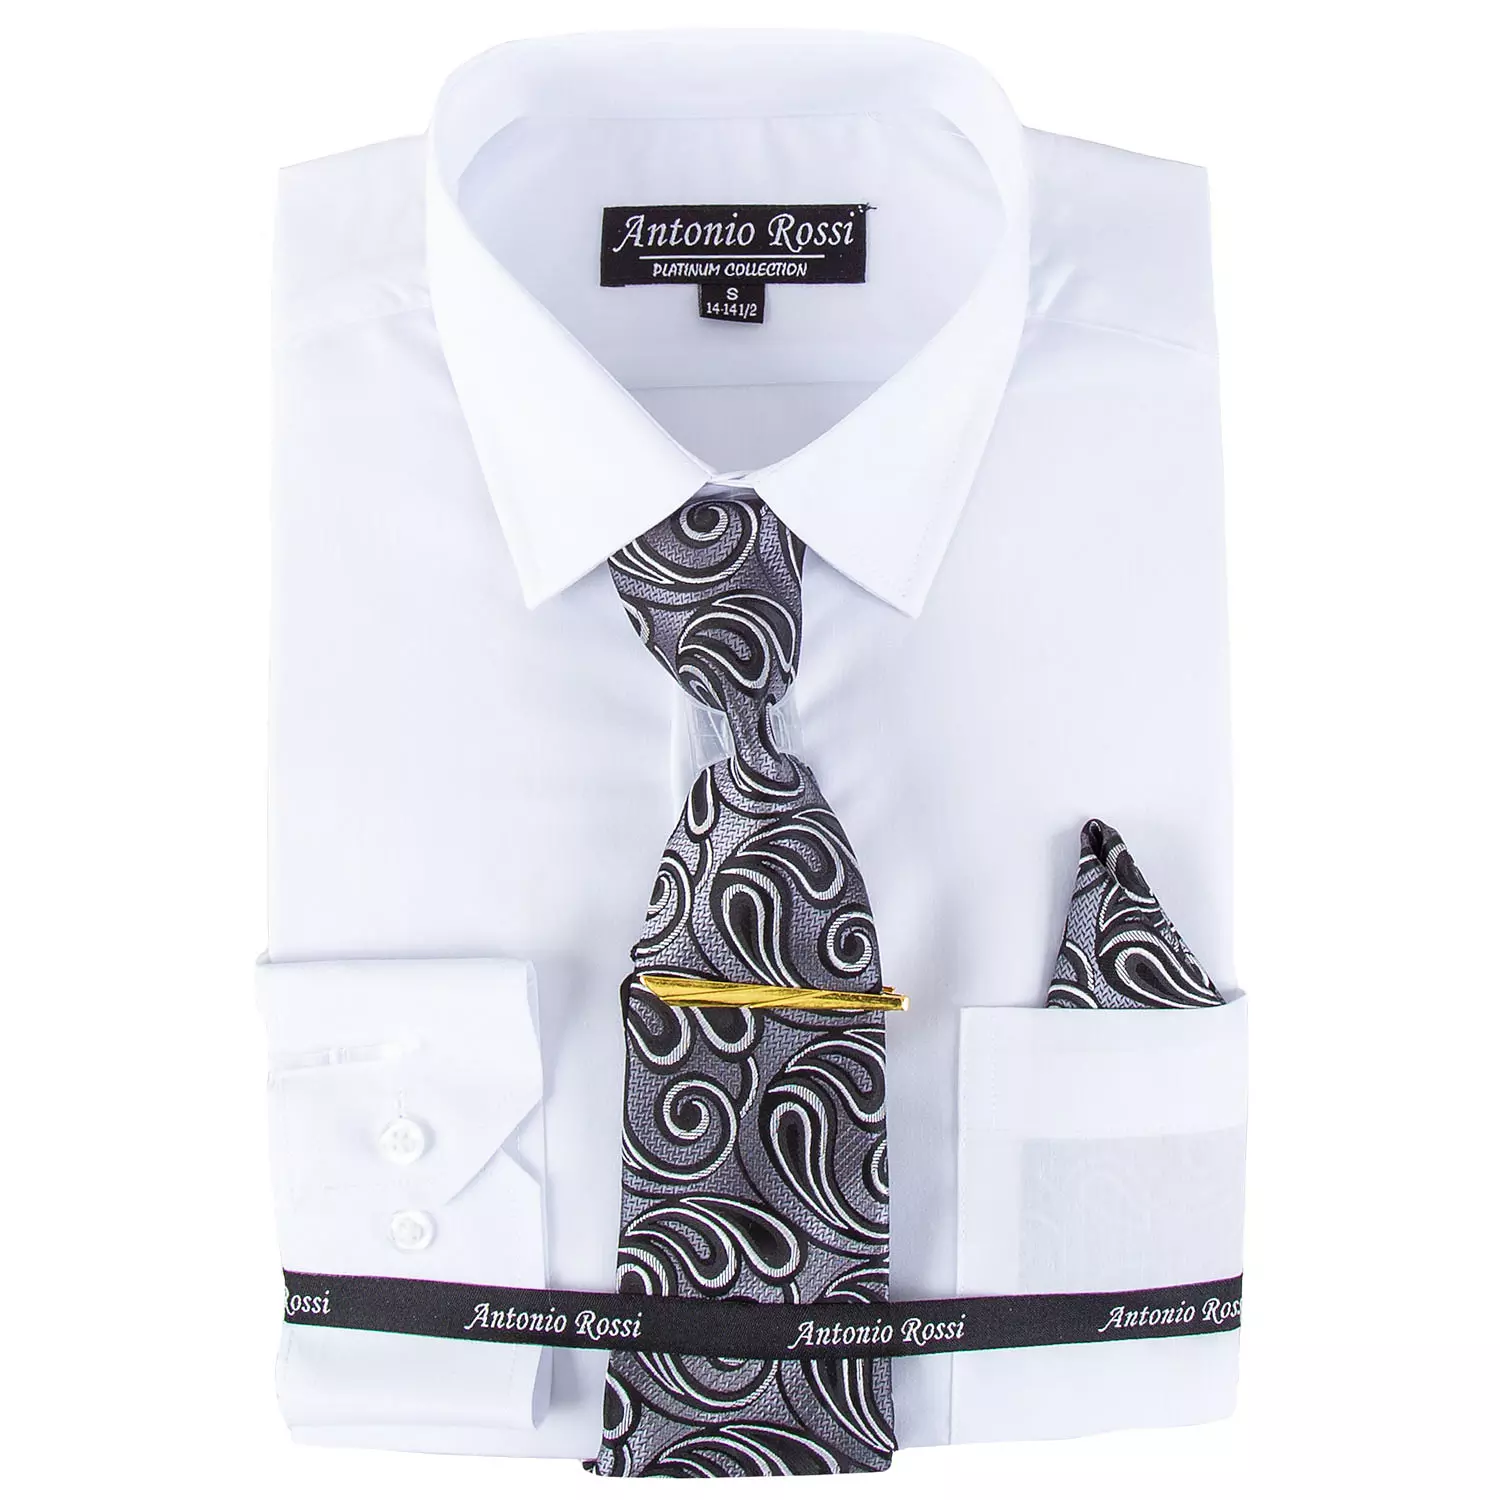 Antonio Rossi - Men's boxed dress shirt with tie, tie clip and hankerchief, white shirt, 14-14.5